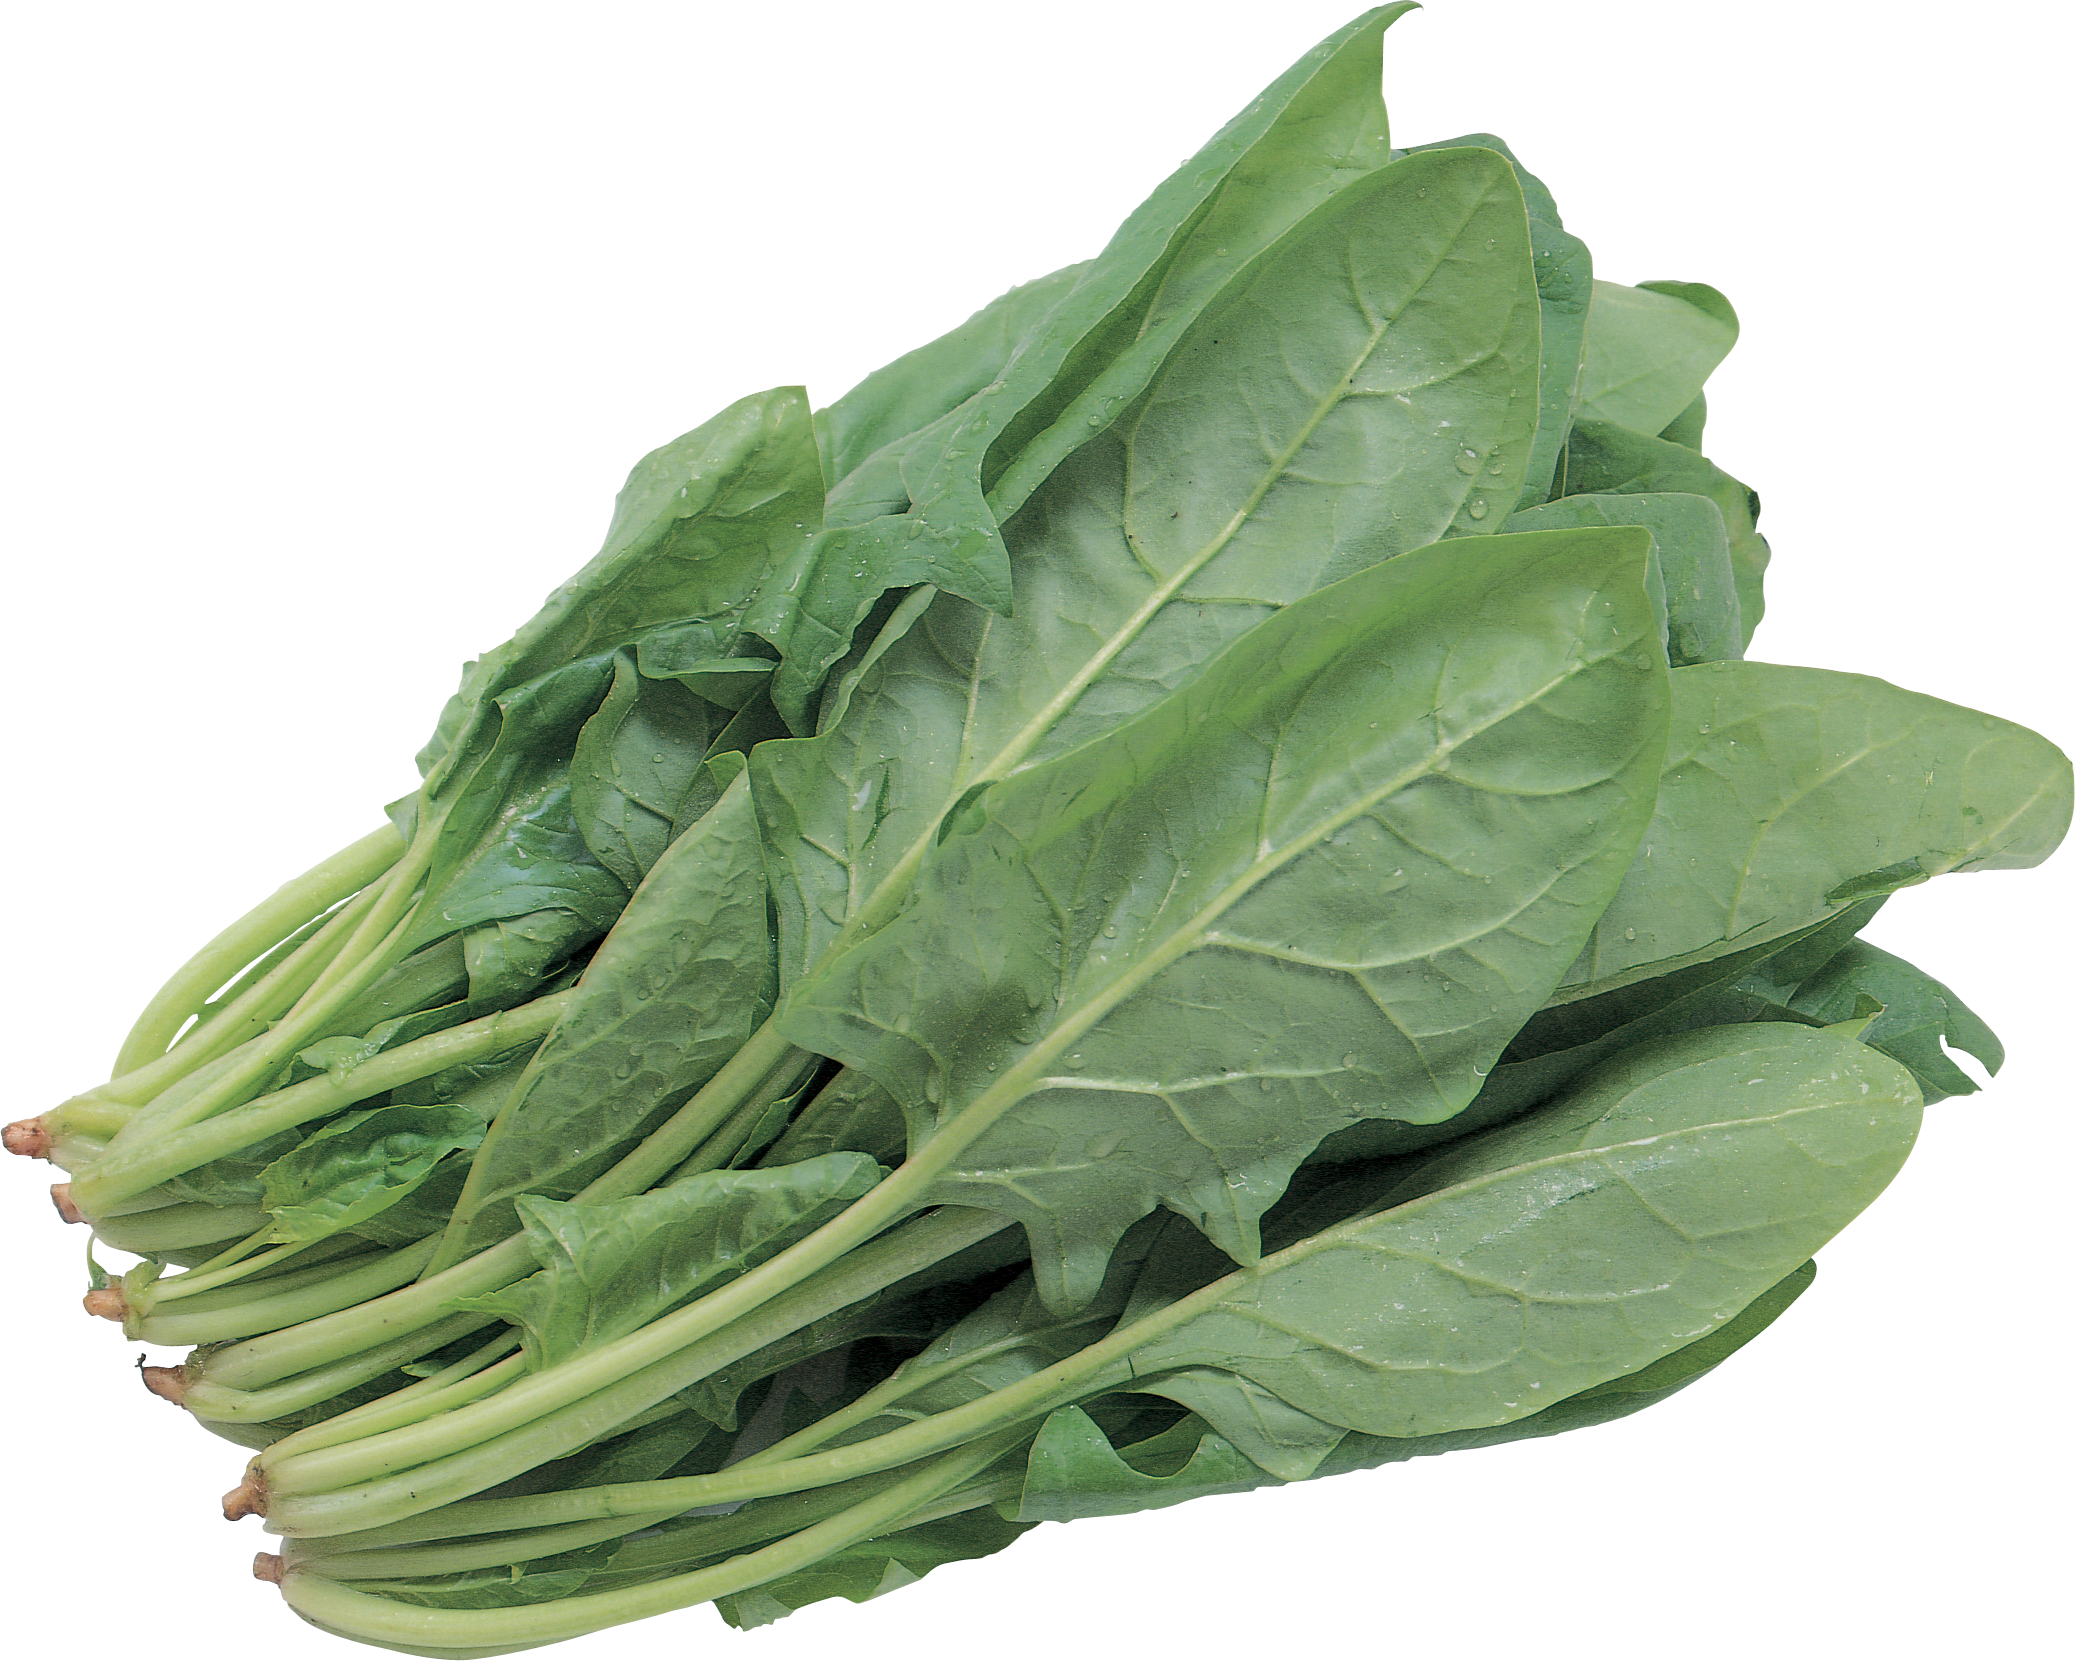 Salad png image purepng. Lettuce clipart spinach